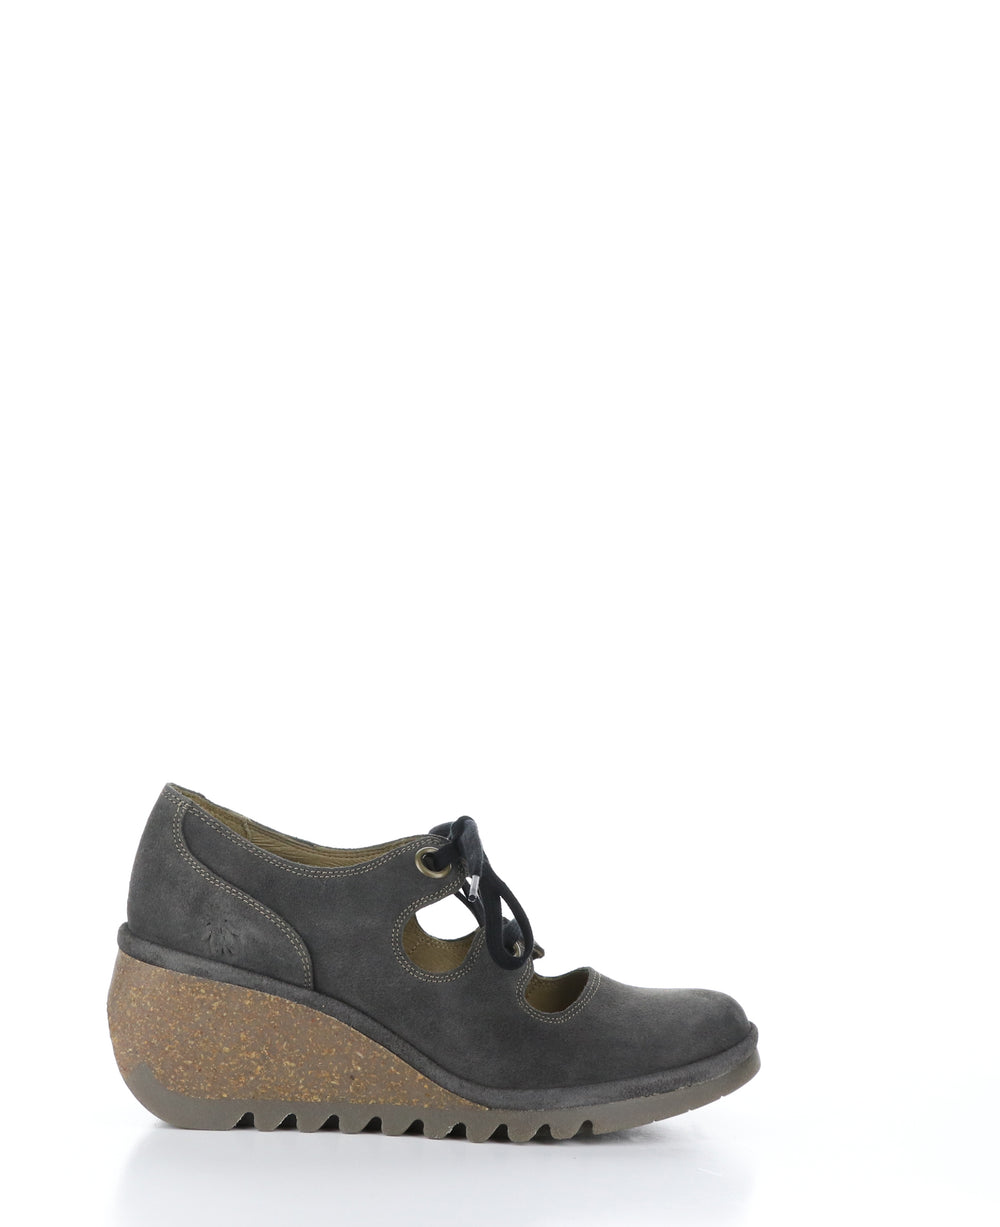 NELY337FLY Diesel Round Toe Shoes